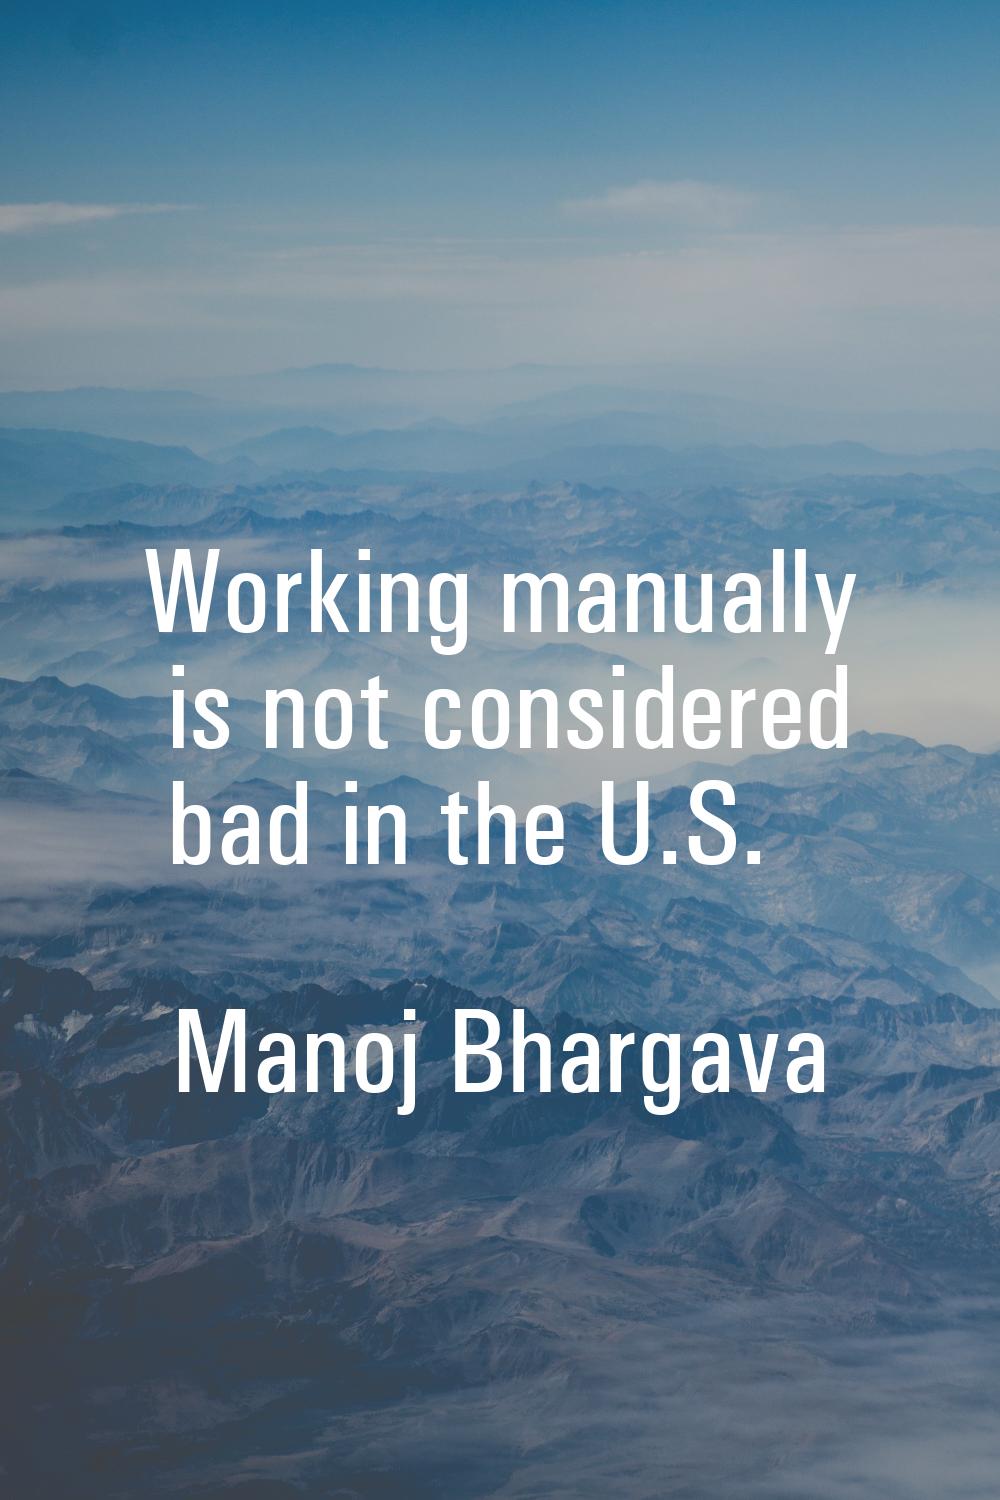 Working manually is not considered bad in the U.S.